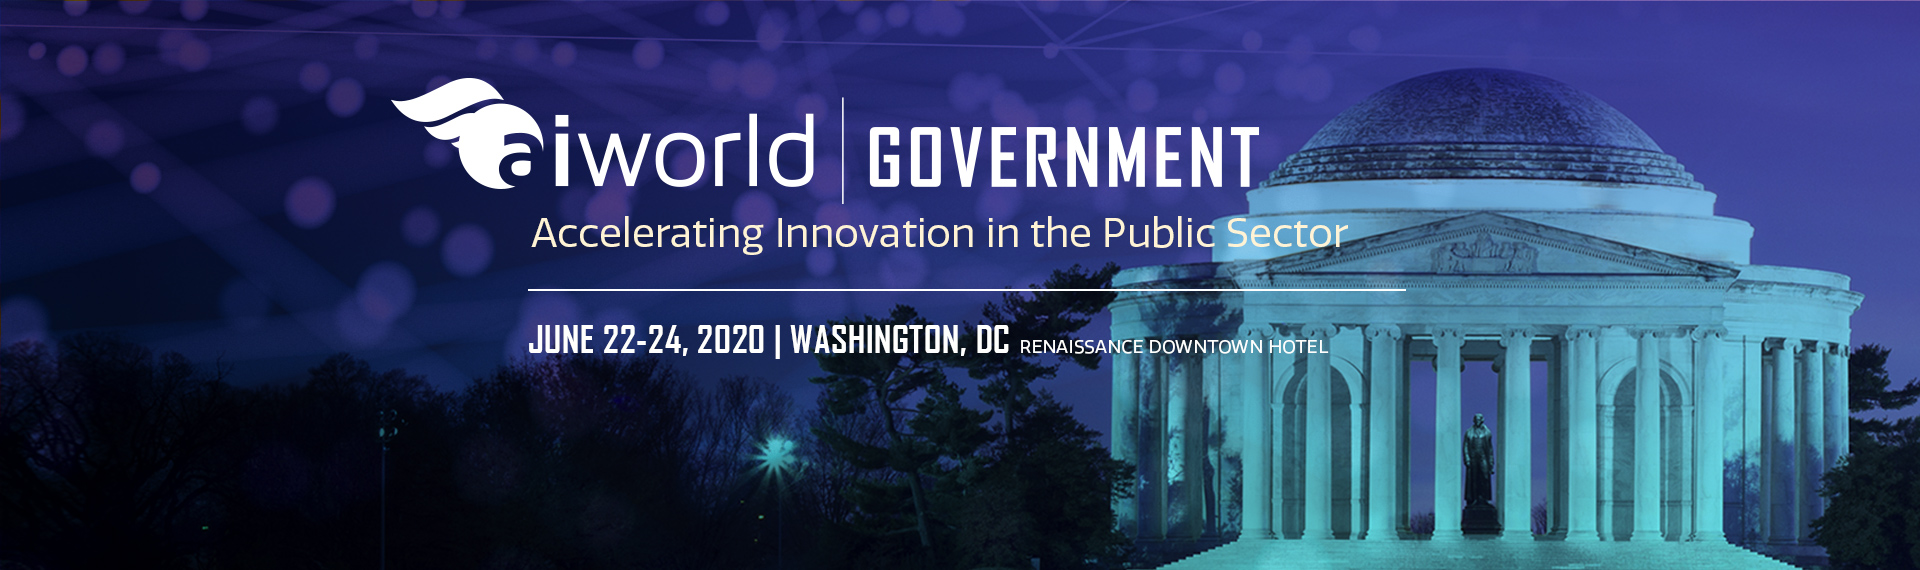 AI World Government to set roadmap to implement AI in public services